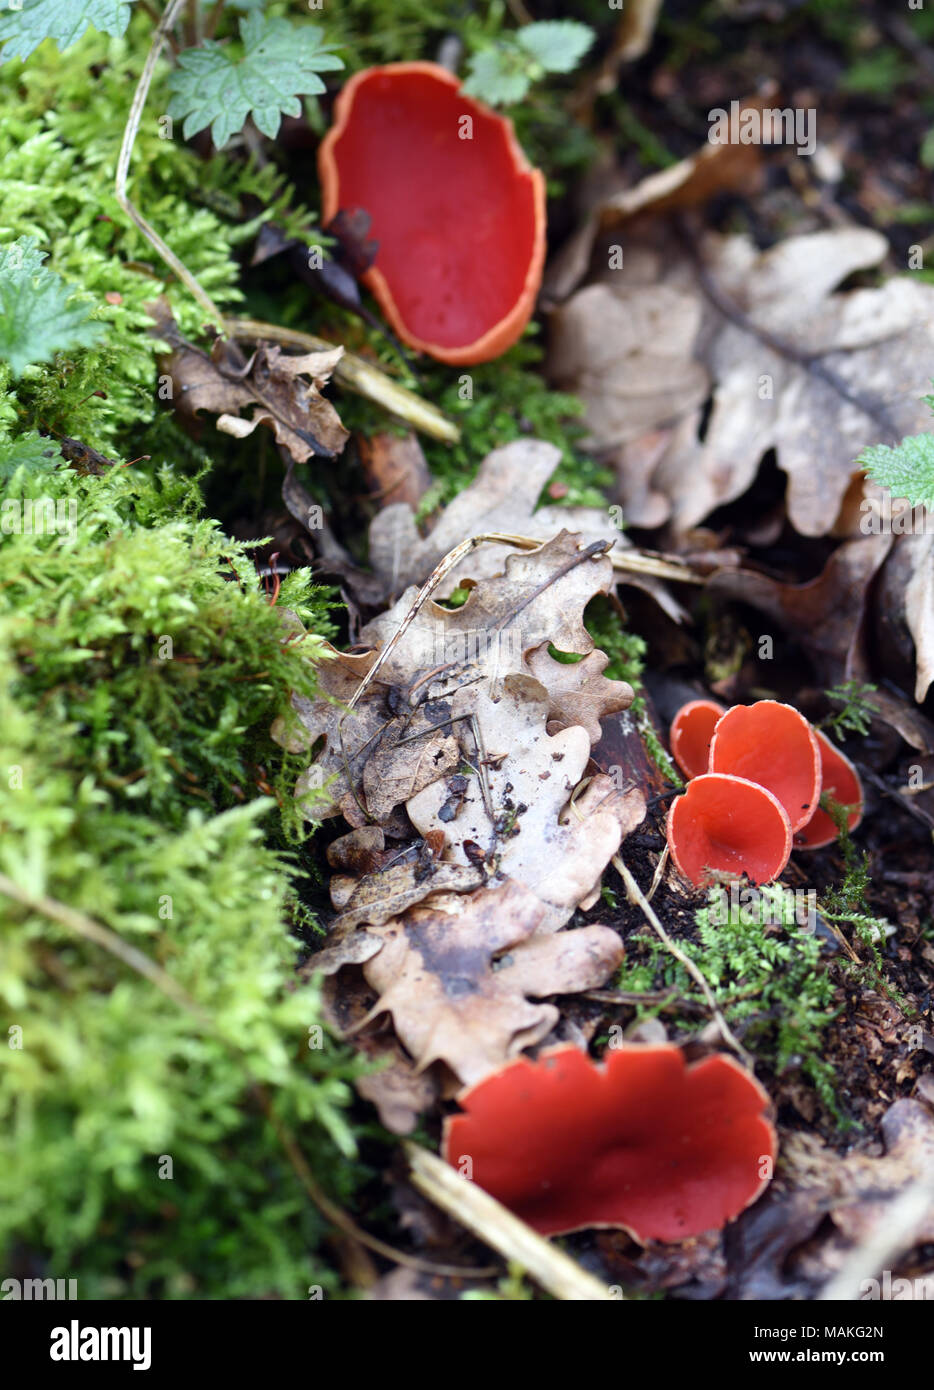 Scarlet elf cap (Sarcoscypha coccinea) fruiting bodies growing from mould and leaf litter in early spring on a woodland floor. Sevenoaks, Kent, Englan Stock Photo